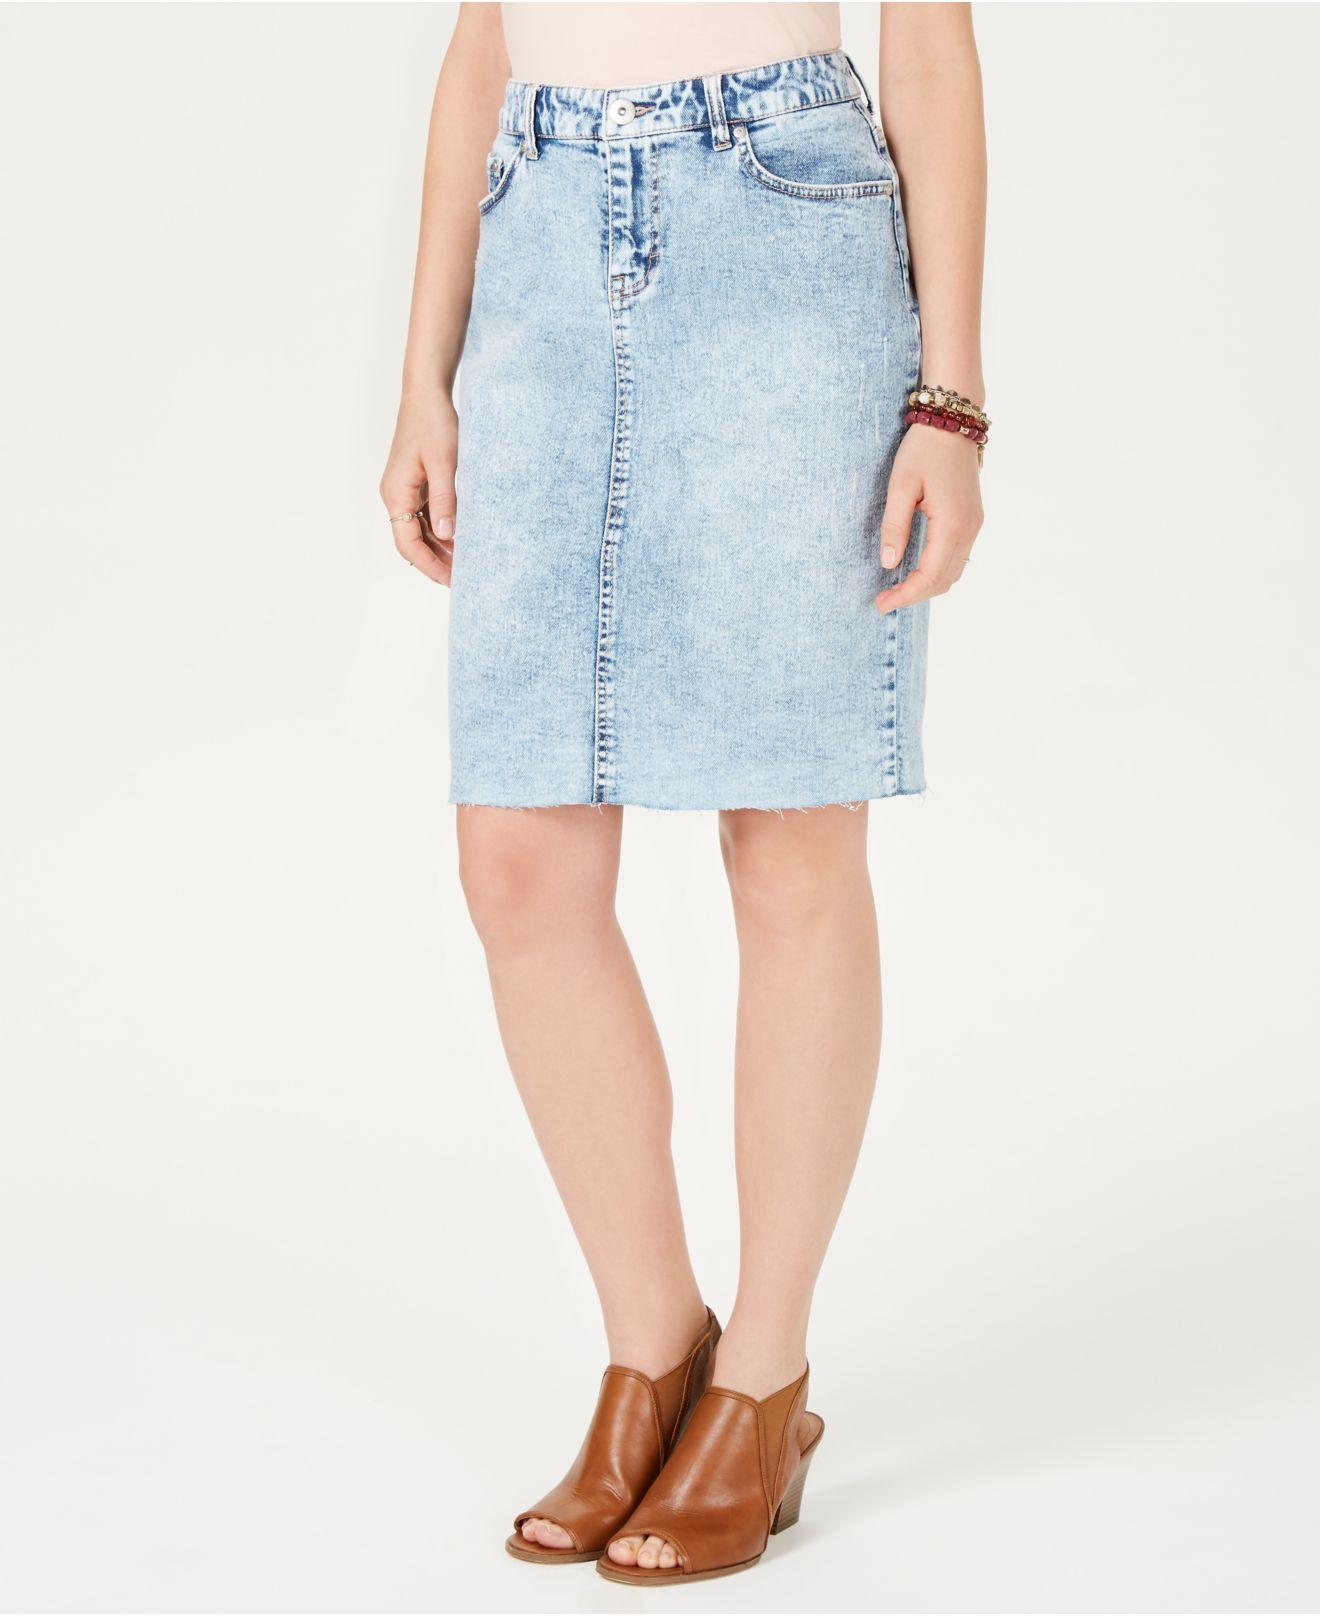 Lyst - Style & Co. Denim Skirt, Created For Macy's in Blue - Save 51%